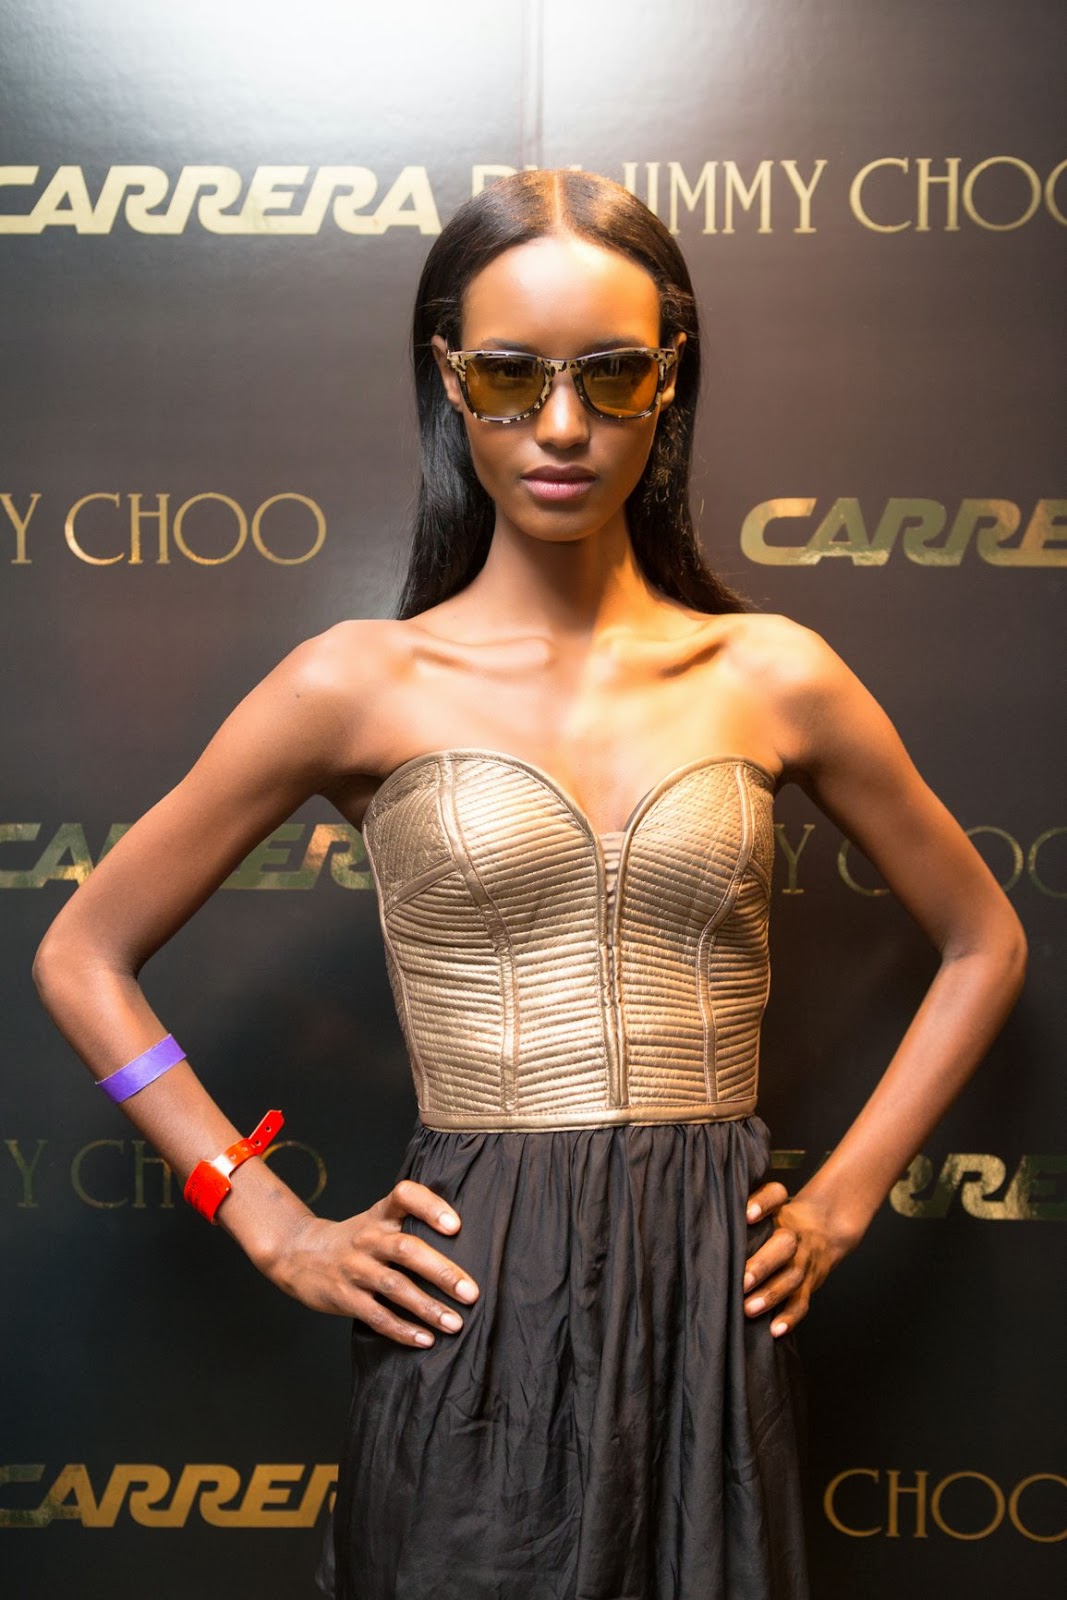 Carrera By Jimmy Choo Launch Party: Black With A Hint Of Gold | Orange  Juice and Biscuits